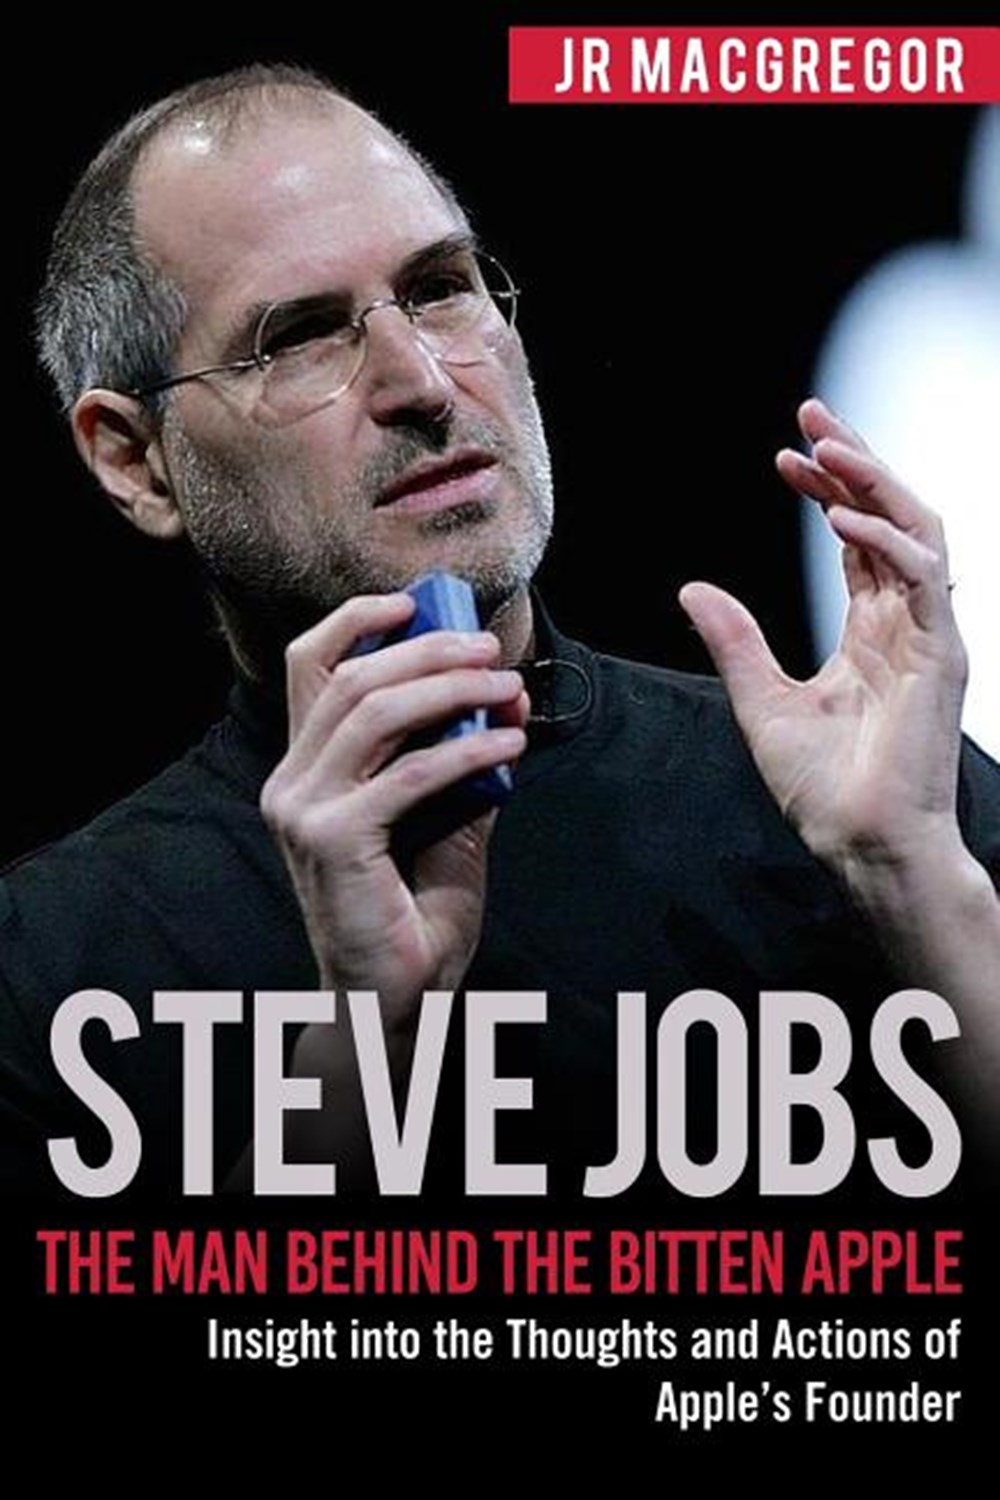 Steve Jobs The Man Behind the Bitten Apple: Insight into the Thoughts and Actions of Apple's Founder